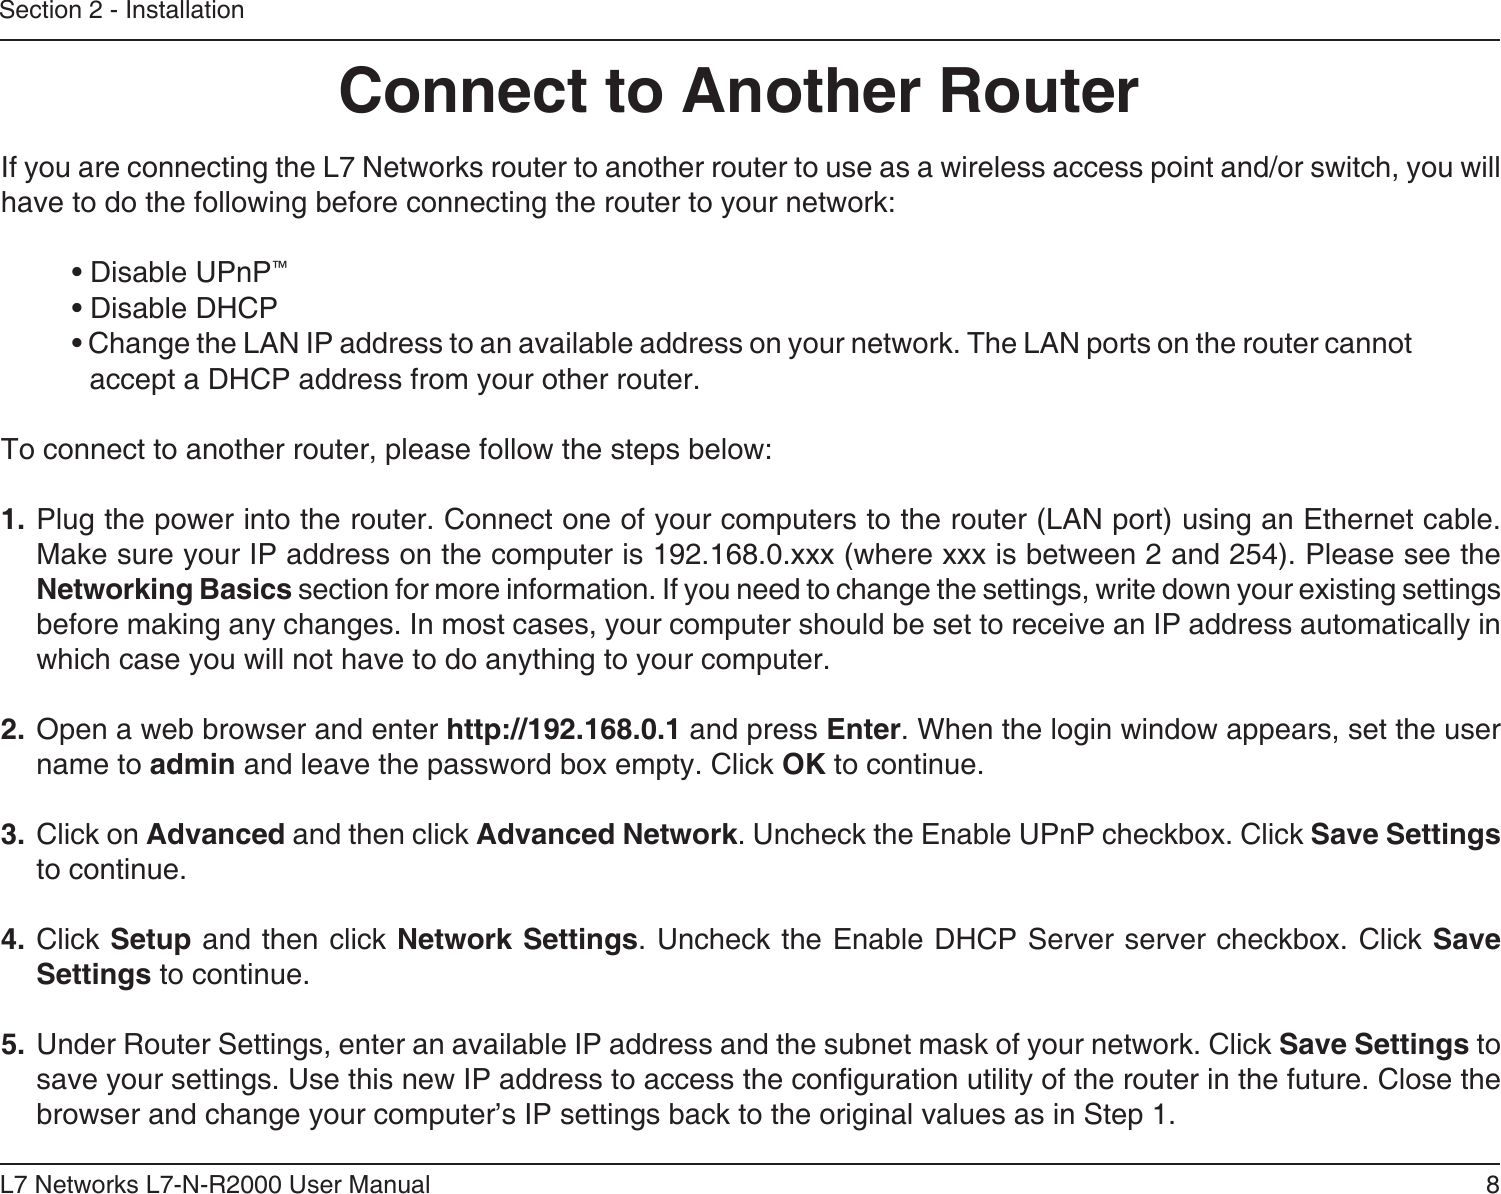 8L7 Networks L7-N-R2000 User ManualSection 2 - InstallationIf you are connecting the L7 Networks router to another router to use as a wireless access point and/or switch, you will have to do the following before connecting the router to your network:• Disable UPnP™• Disable DHCP• Change the LAN IP address to an available address on your network. The LAN ports on the router cannot accept a DHCP address from your other router.To connect to another router, please follow the steps below:1. Plug the power into the router. Connect one of your computers to the router (LAN port) using an Ethernet cable. Make sure your IP address on the computer is 192.168.0.xxx (where xxx is between 2 and 254). Please see the Networking Basics section for more information. If you need to change the settings, write down your existing settings before making any changes. In most cases, your computer should be set to receive an IP address automatically in which case you will not have to do anything to your computer.2. Open a web browser and enter http://192.168.0.1 and press Enter. When the login window appears, set the user name to admin and leave the password box empty. Click OK to continue.3. Click on Advanced and then click Advanced Network. Uncheck the Enable UPnP checkbox. Click Save Settings to continue. 4. Click Setup and then click Network Settings. Uncheck the Enable DHCP Server server checkbox. Click Save Settings to continue.5. Under Router Settings, enter an available IP address and the subnet mask of your network. Click Save Settings to save your settings. Use this new IP address to access the conguration utility of the router in the future. Close the browser and change your computer’s IP settings back to the original values as in Step 1.Connect to Another Router